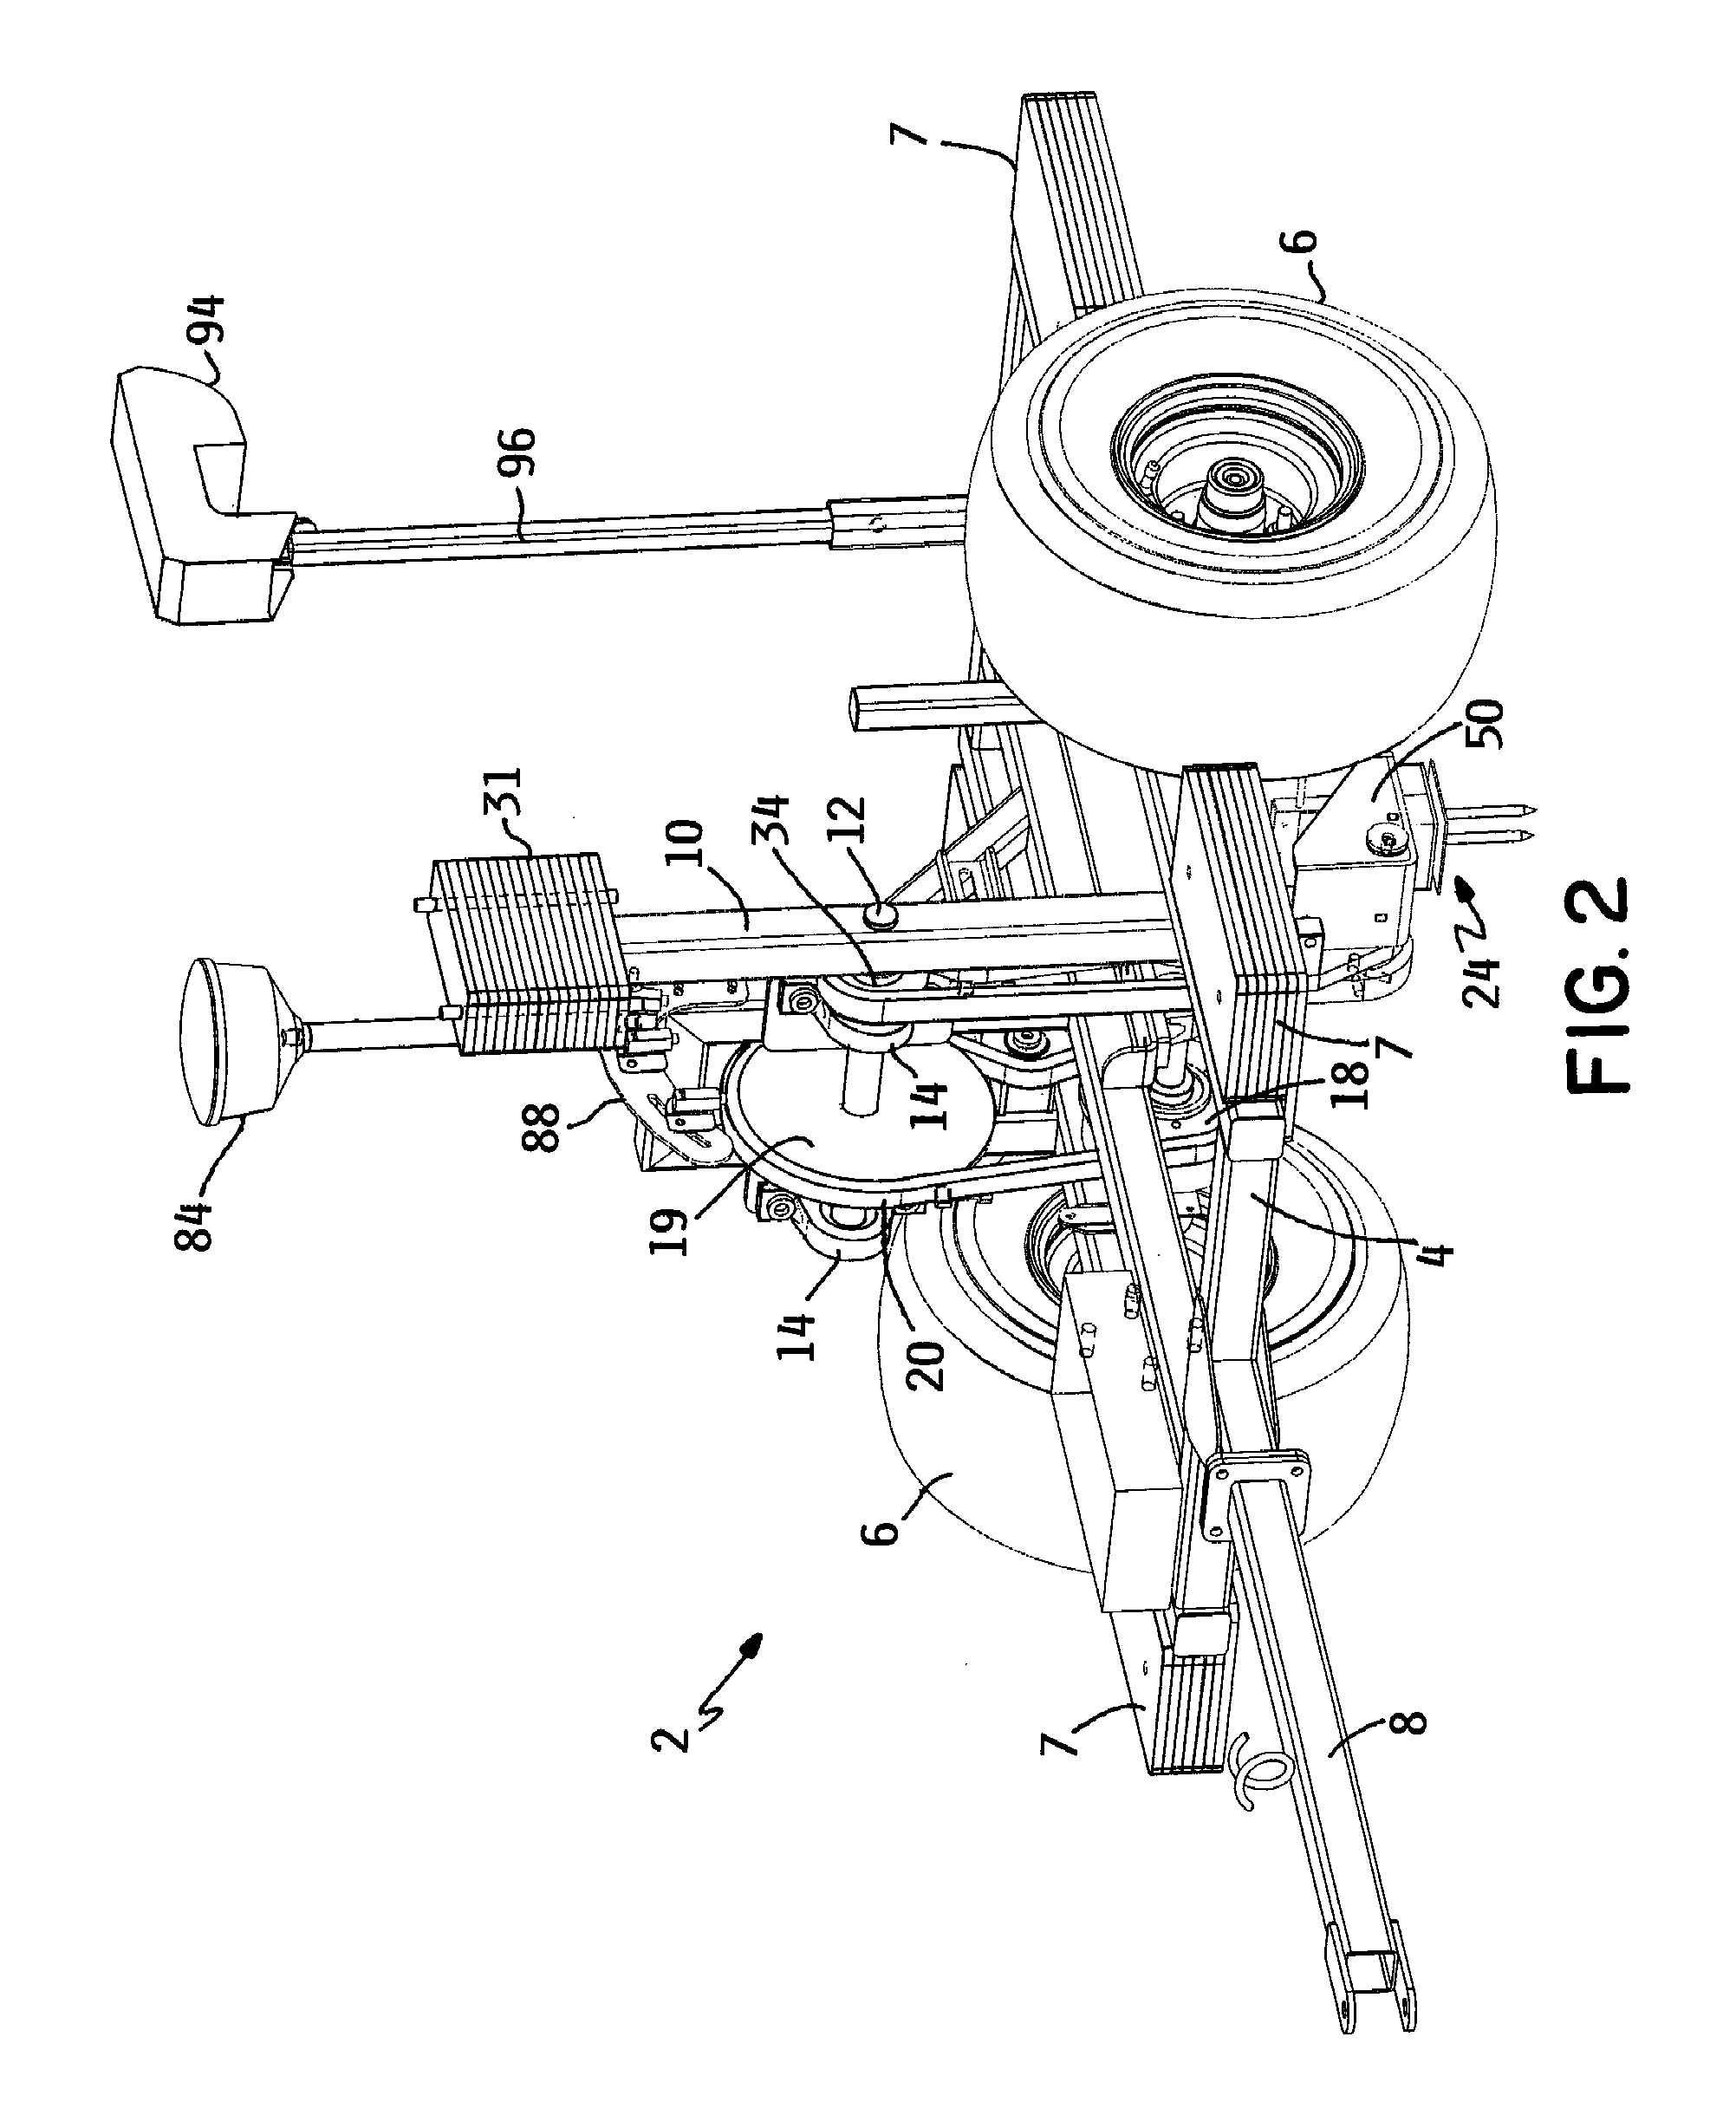 Mobile turf instrument apparatus having driven, periodically insertable, ground penetrating probe assembly